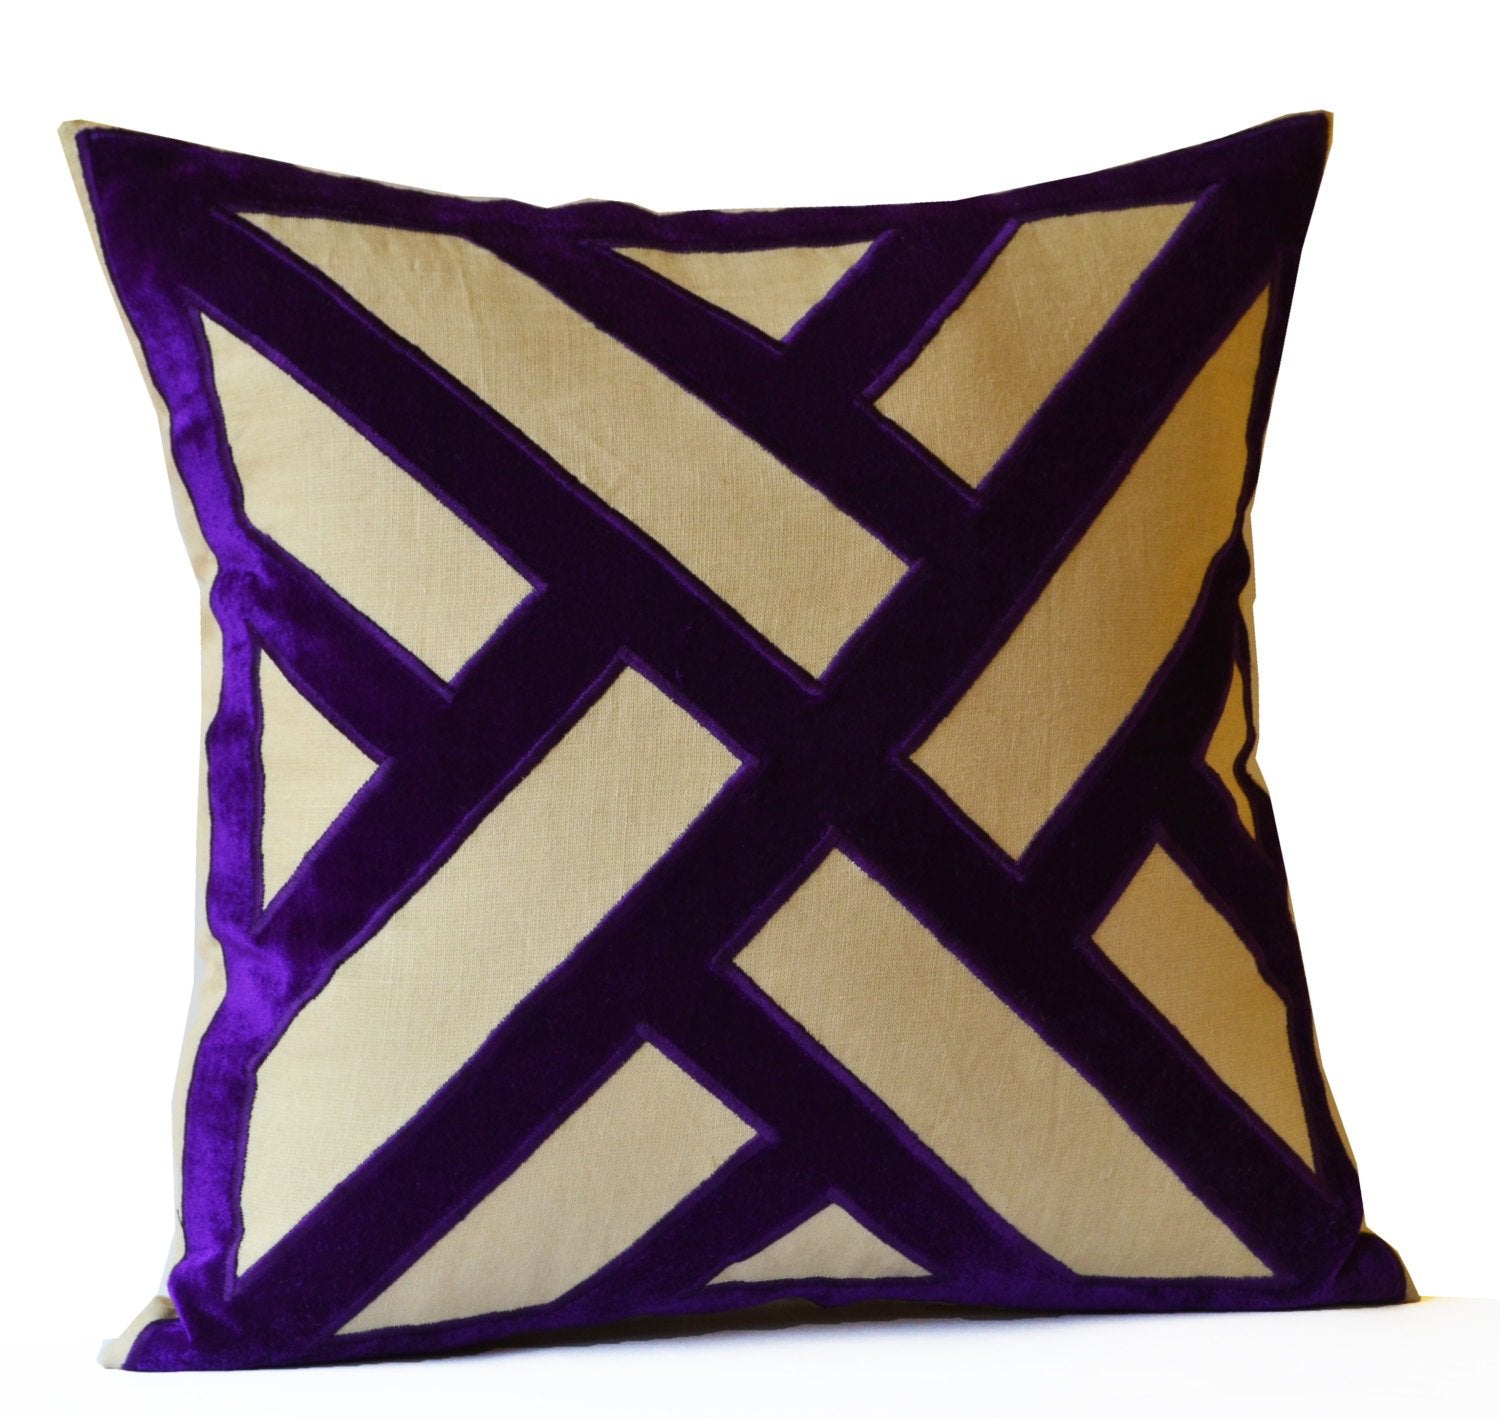 Amore Beaute Throw pillow cover in grey linen with purple velvet applique pillow cover to create a textured geometric pattern.